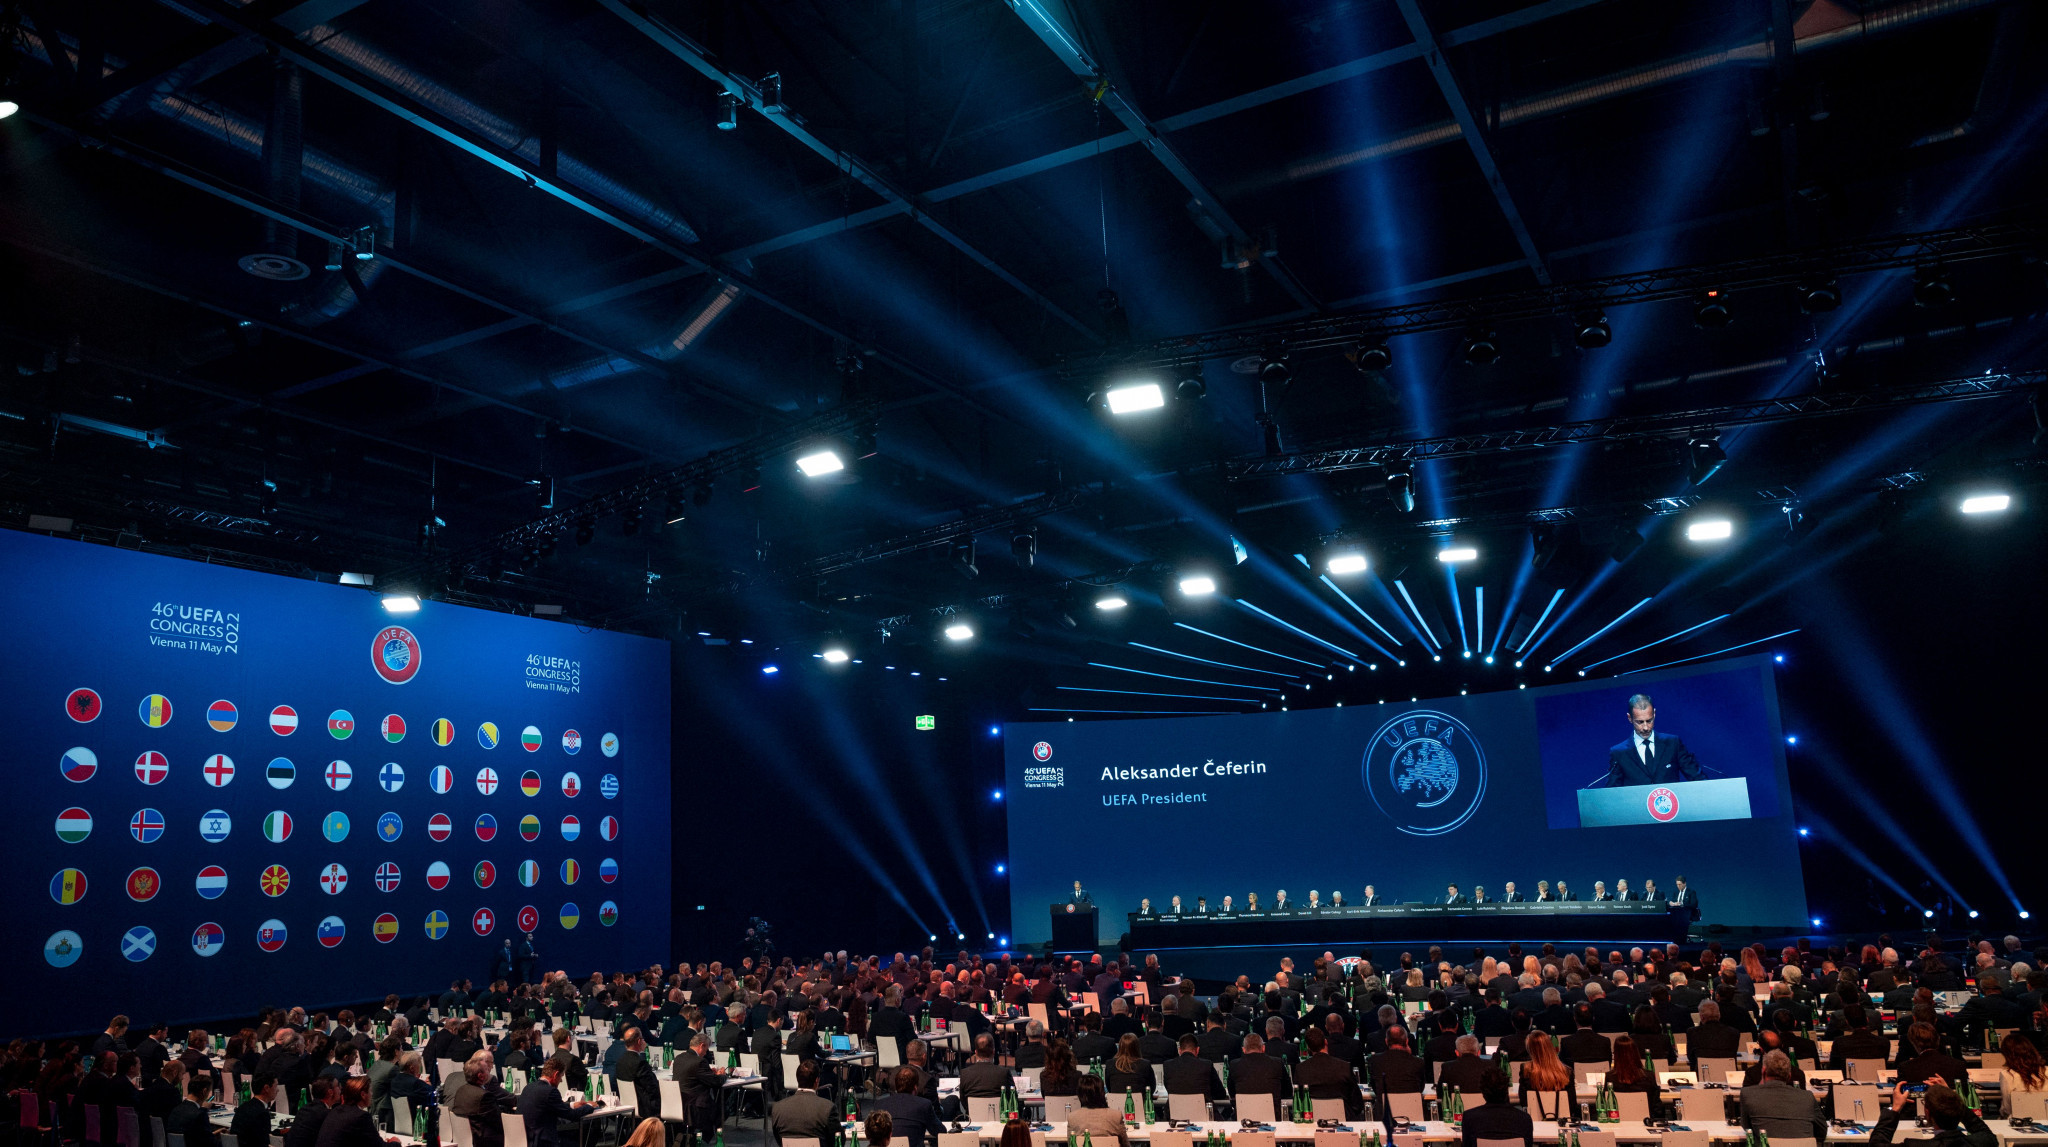 The Russian Football Union has not been suspended by UEFA and was represented at today's UEFA Congress in Vienna ©Getty Images